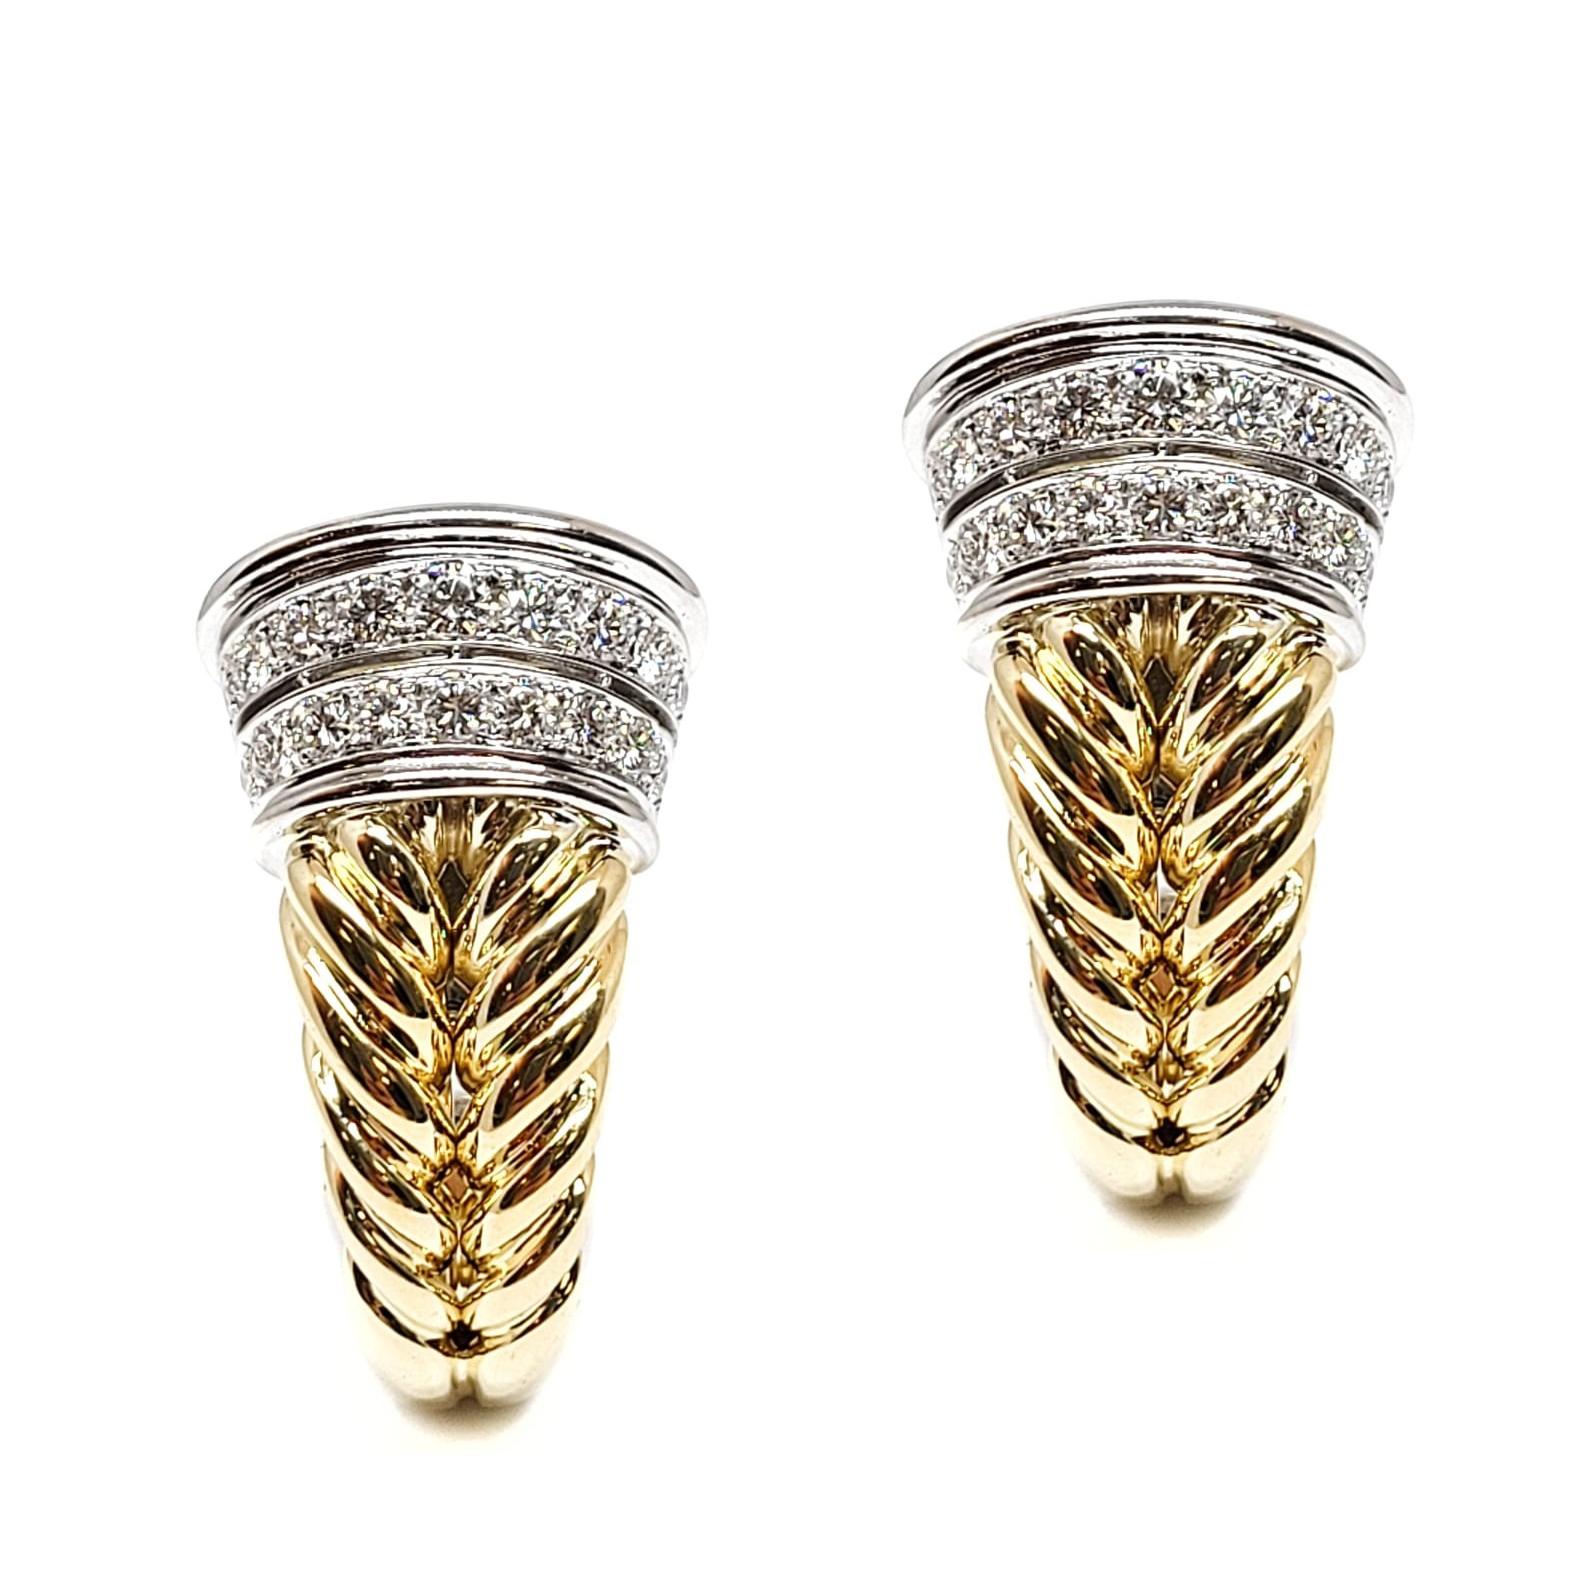 Andreoli 2.00 Carat Diamond 18 Karat Two-Tone Gold Earrings

These earrings feature:
- 2.00 Carat Diamond
- 32.24 Gram 18K Two-Tone Gold
- Made In Italy